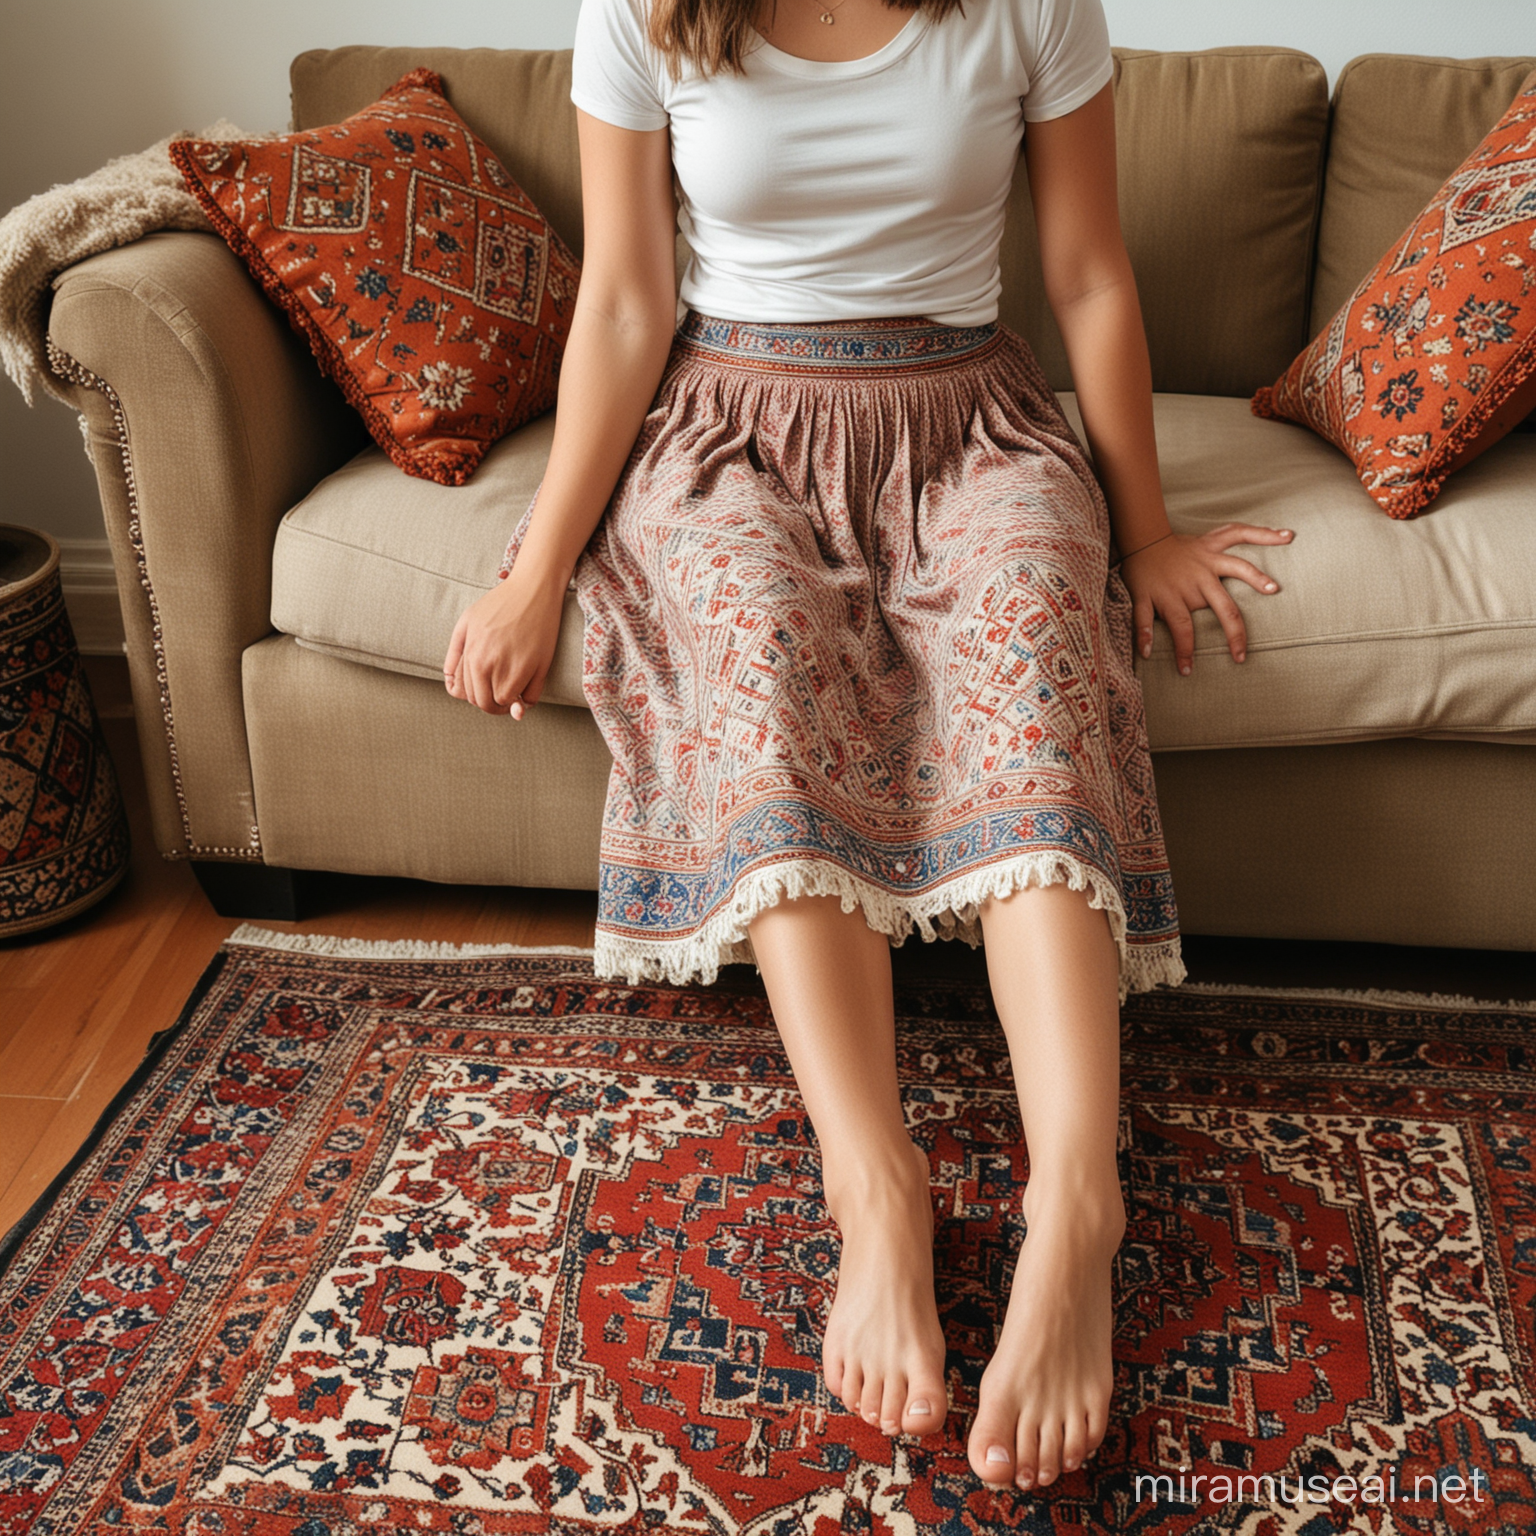 Young Girl Relaxing on Sofa with Persian Rug